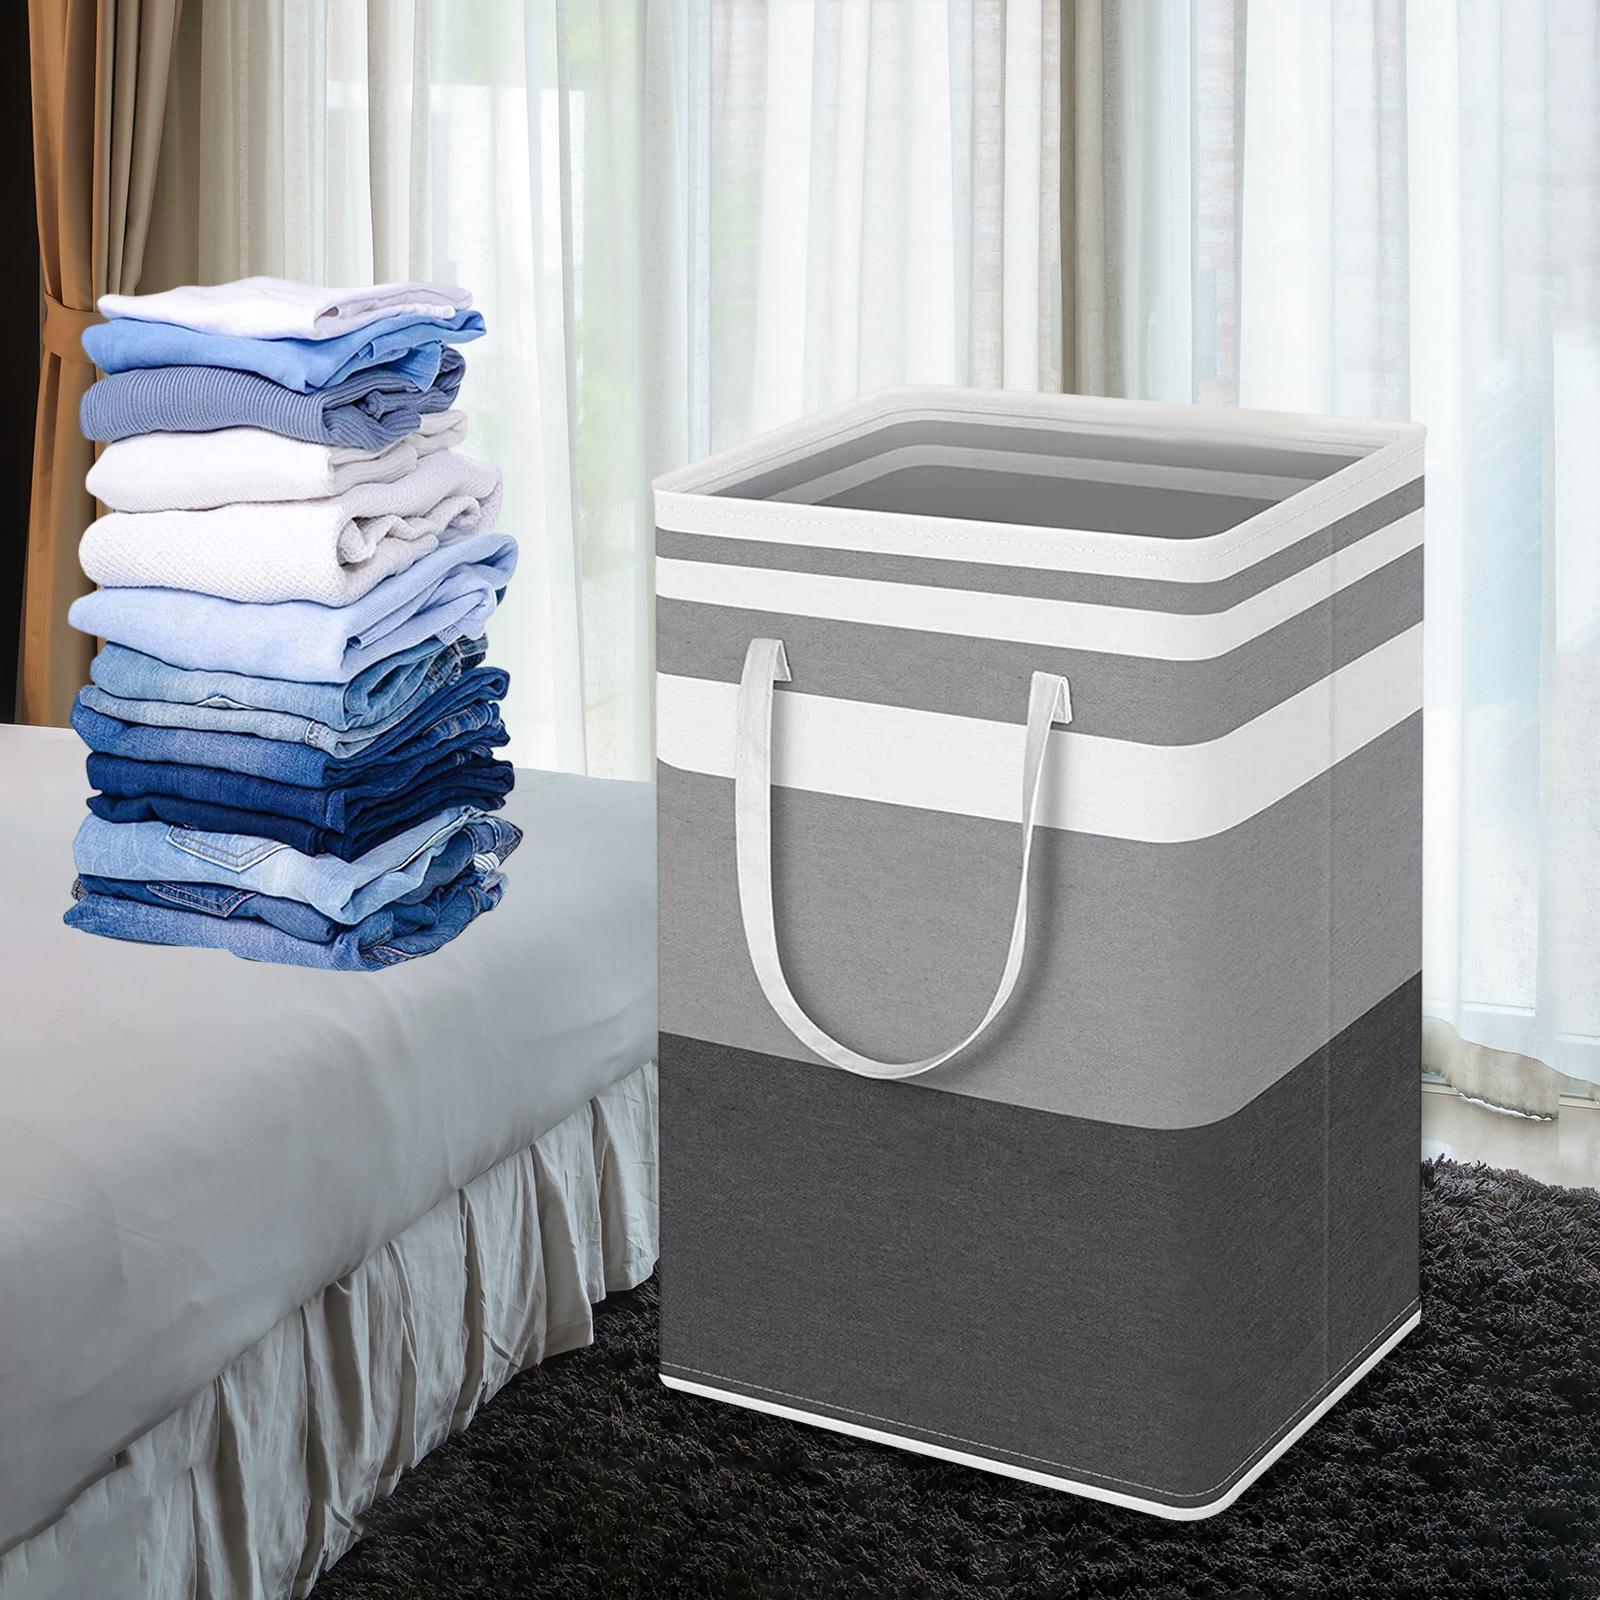 Clothes Storage Basket Multipurpose Space Saving Portable for Home Travel